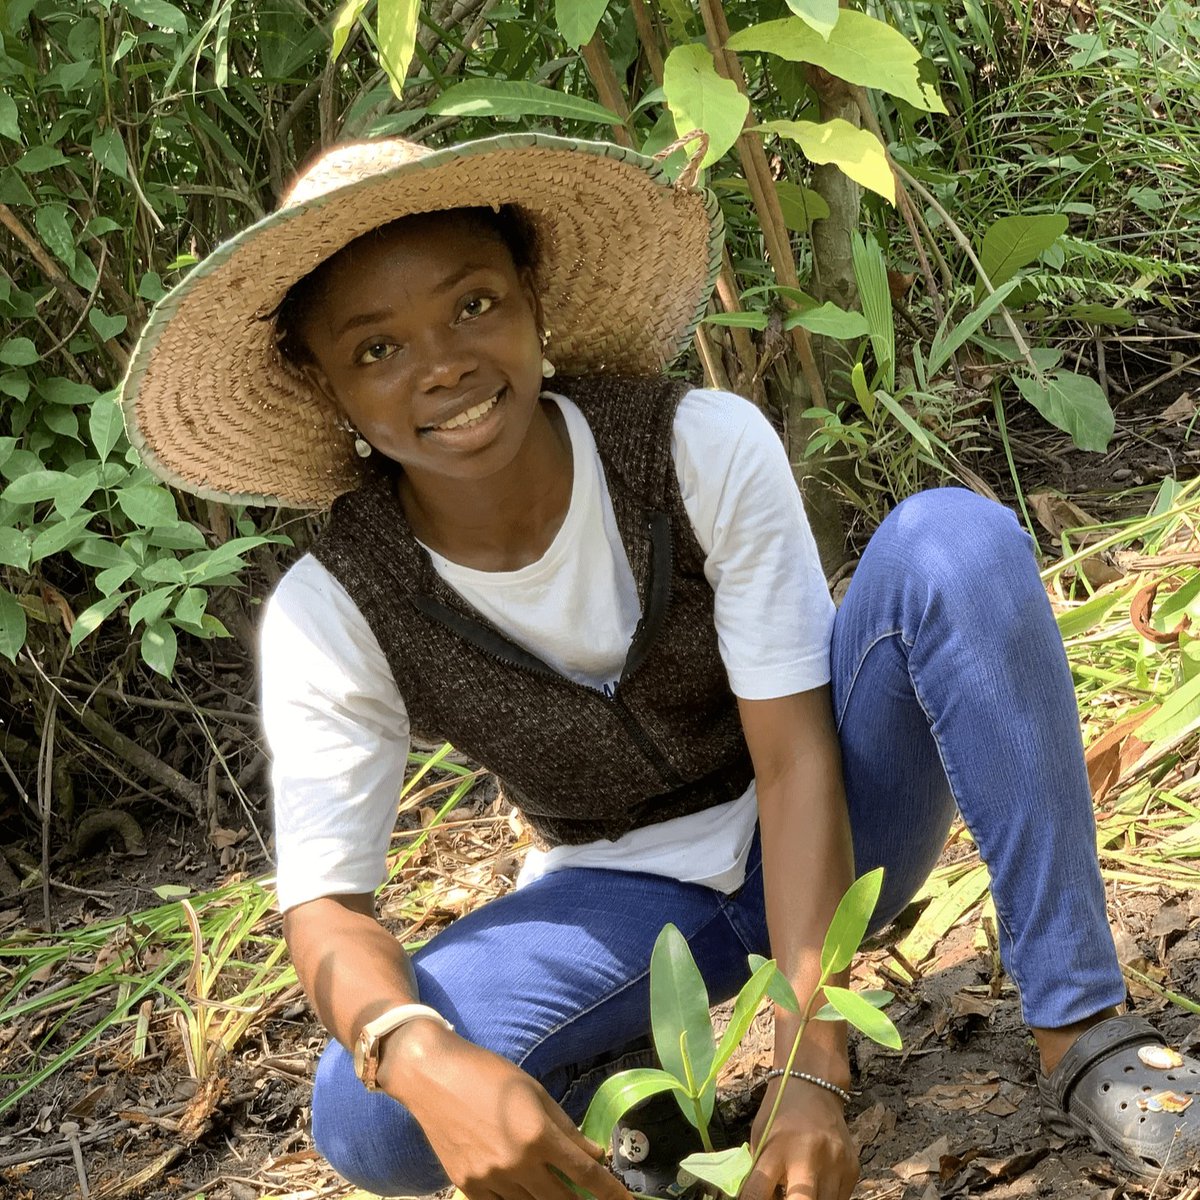 While much attention has been devoted to forest restoration, the vital #mangrove ecosystems have been overlooked, says GLF Restoration Steward Anna Obi Akpe. Want to learn more about her restoration journey? Read the full interview: #ActLandscape bit.ly/3TYFkcH